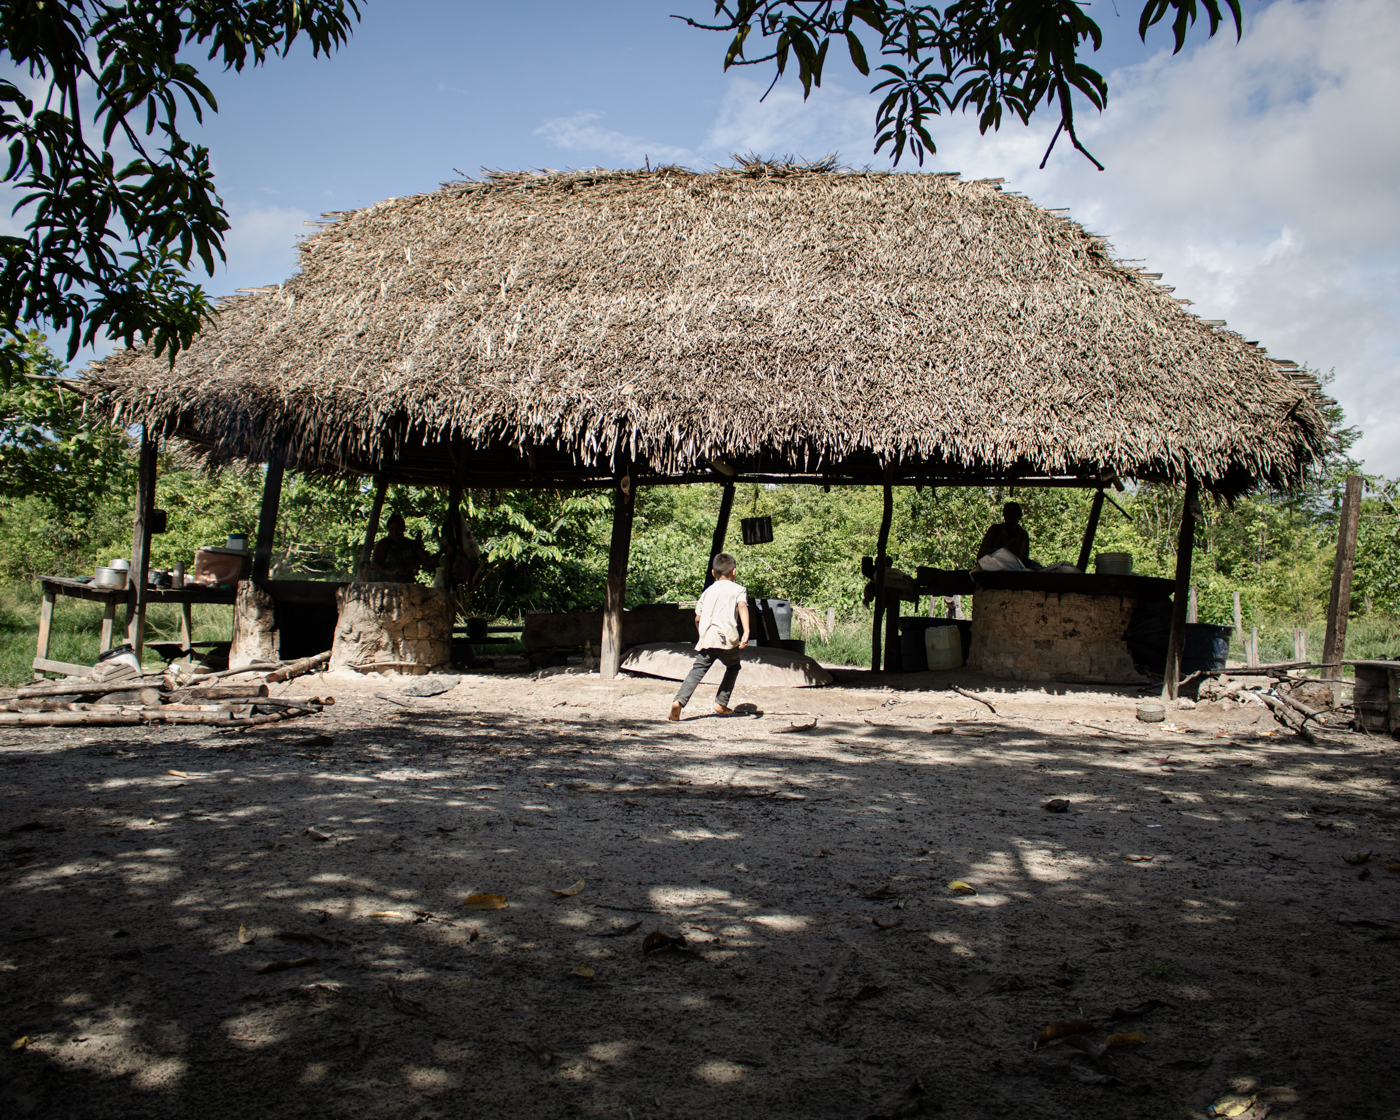 The cassava flour ovens of Maria Loreta Pascoal’s family. The community chose cassava flour as the bedrock of its farming economy in the early 2000s, to help protect their territory while providing sustainable income for families.